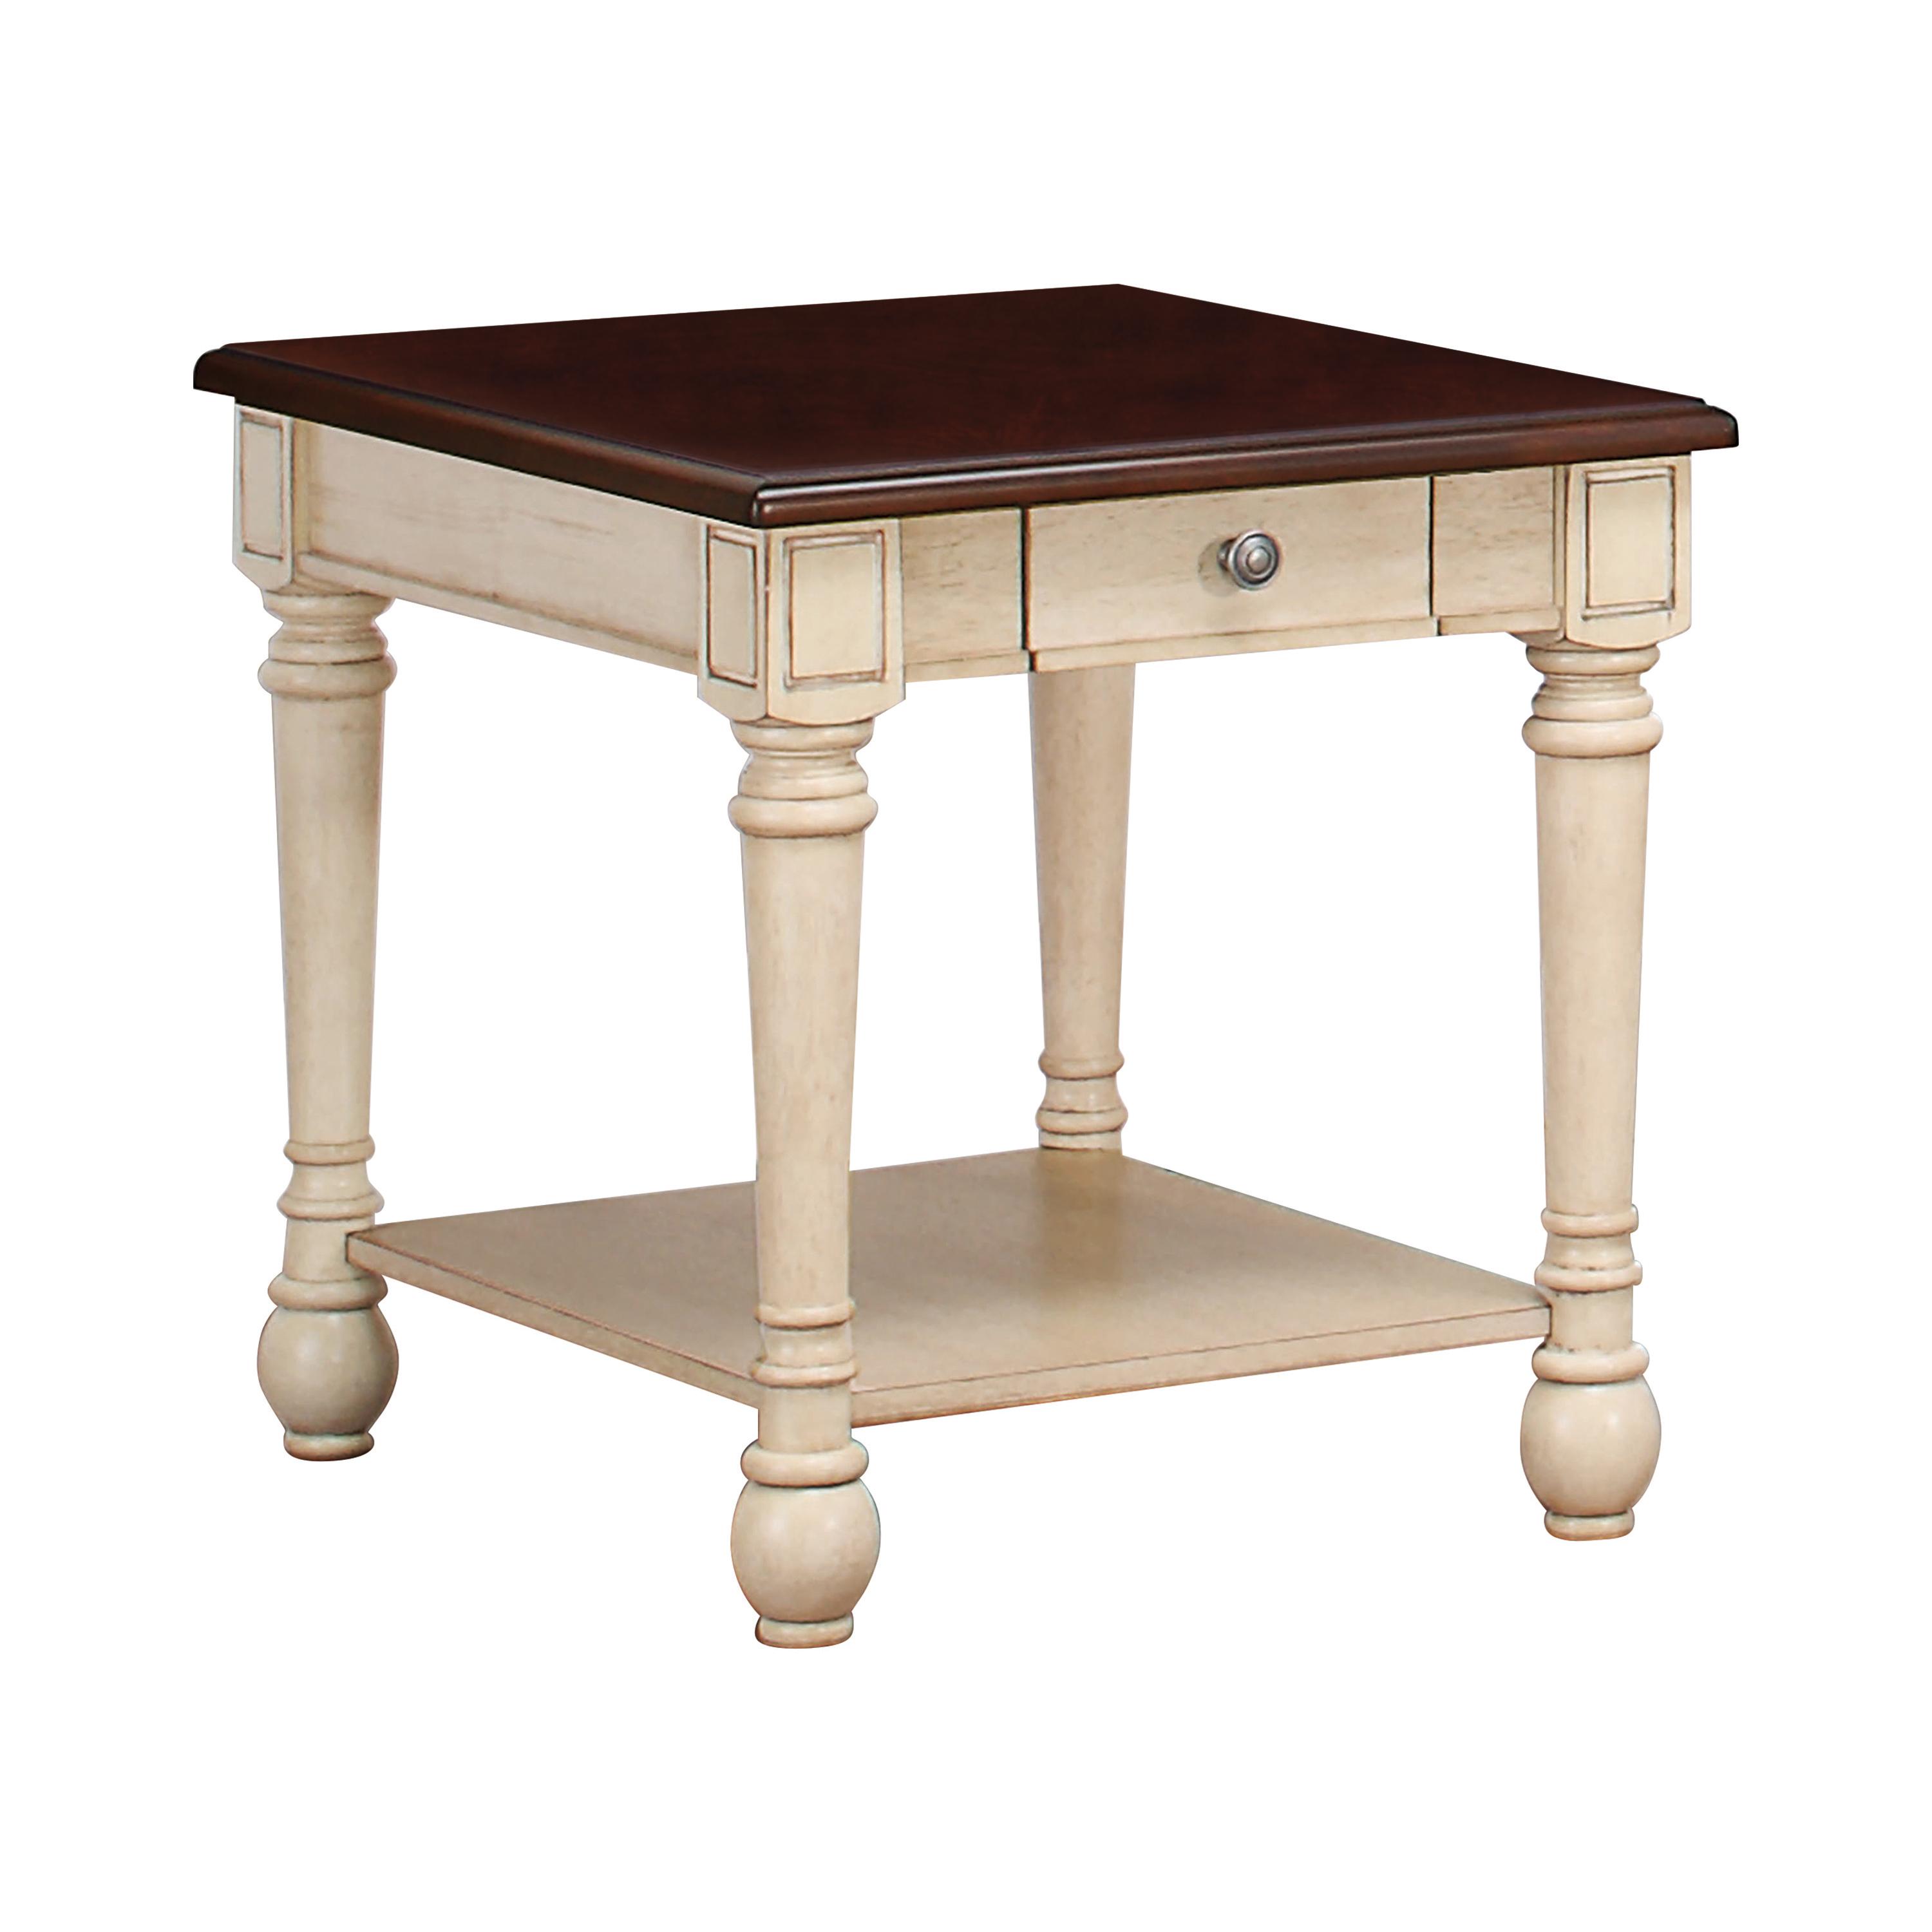 Transitional End Table 704417 704417 in Dark Cherry, Antique White 